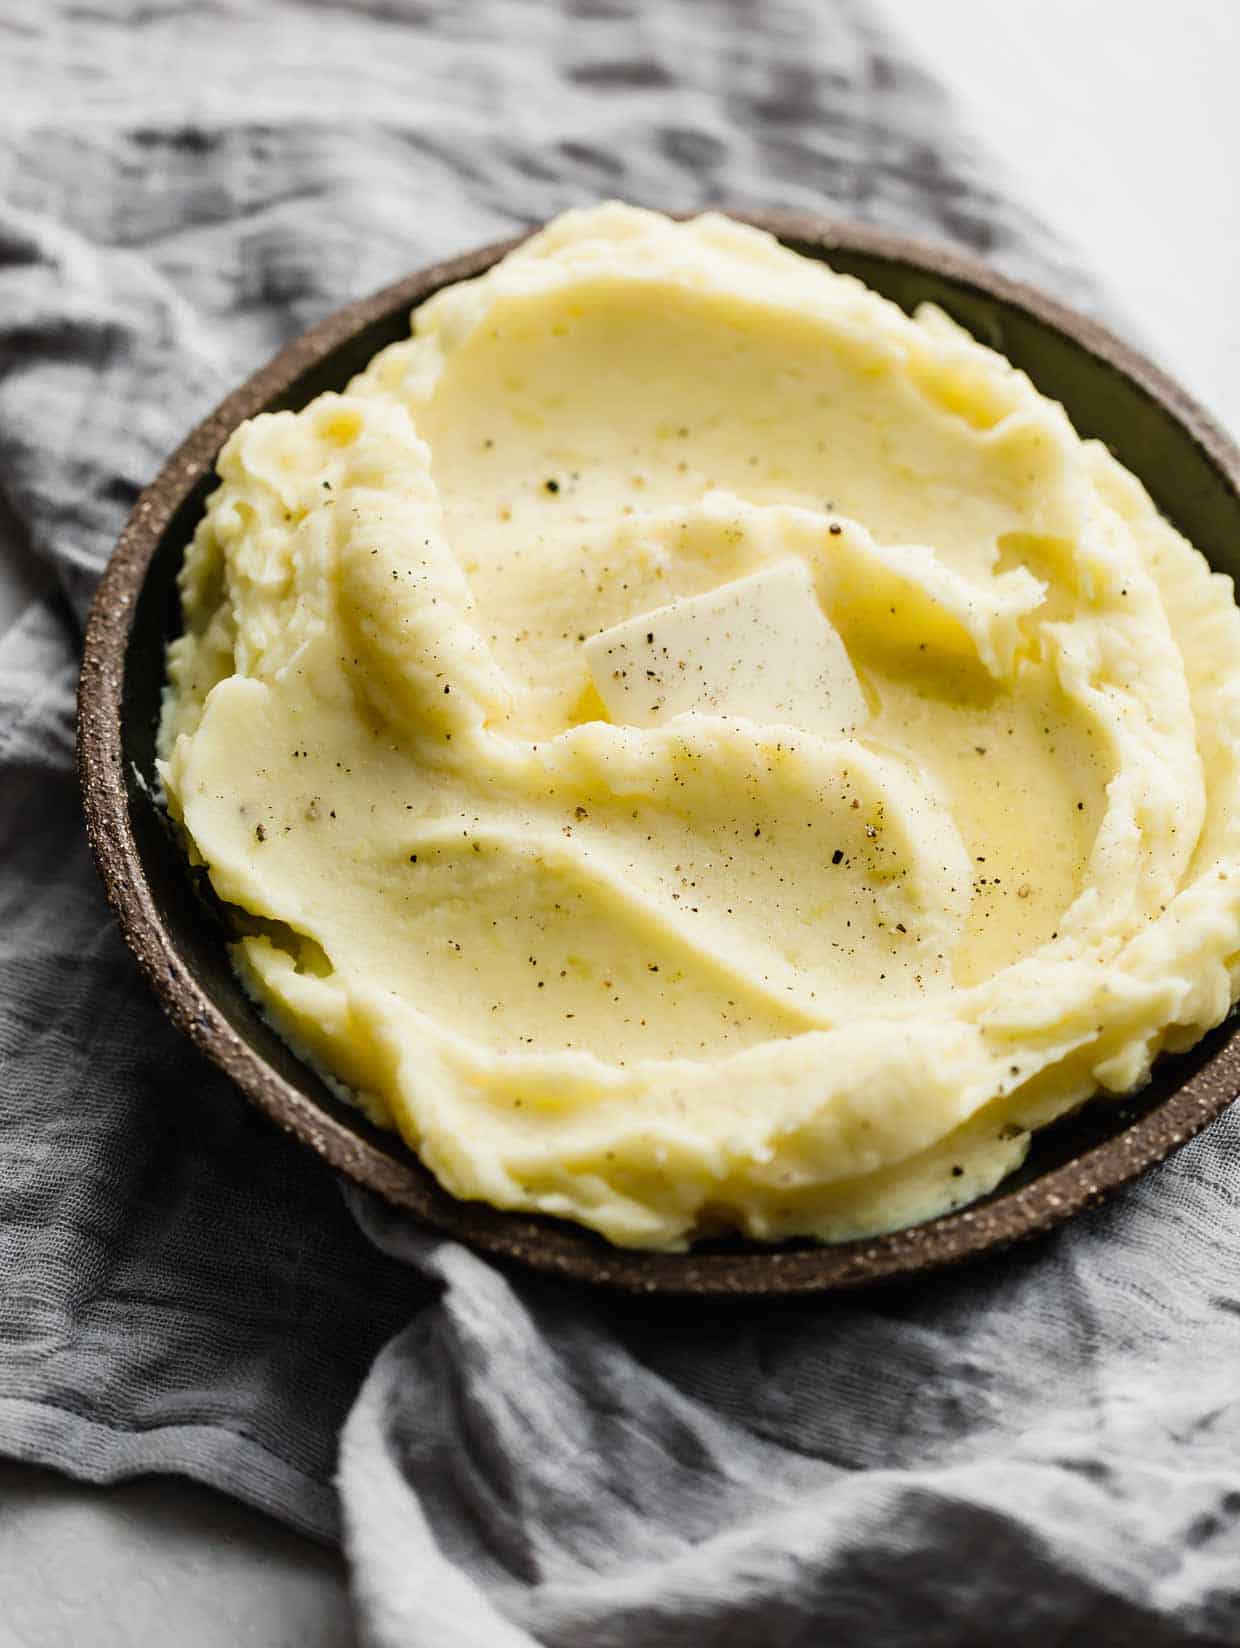 A slice of butter melting into the top of homemade mashed potatoes on a black plate.